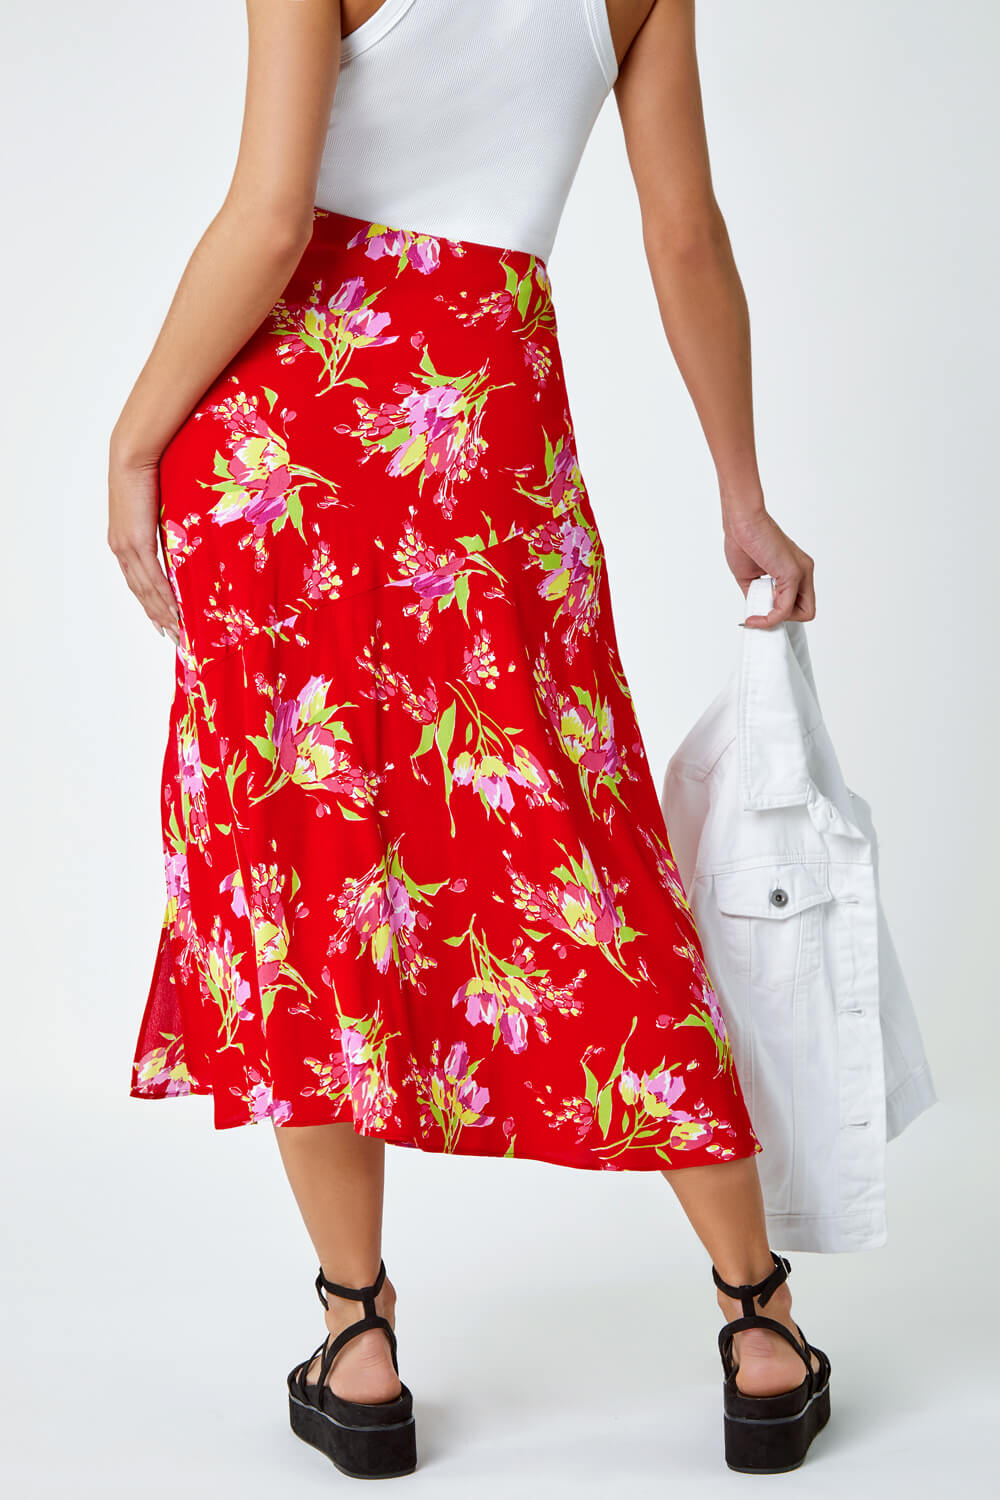 Red Floral Asymmetric Frill Midi Skirt, Image 2 of 5